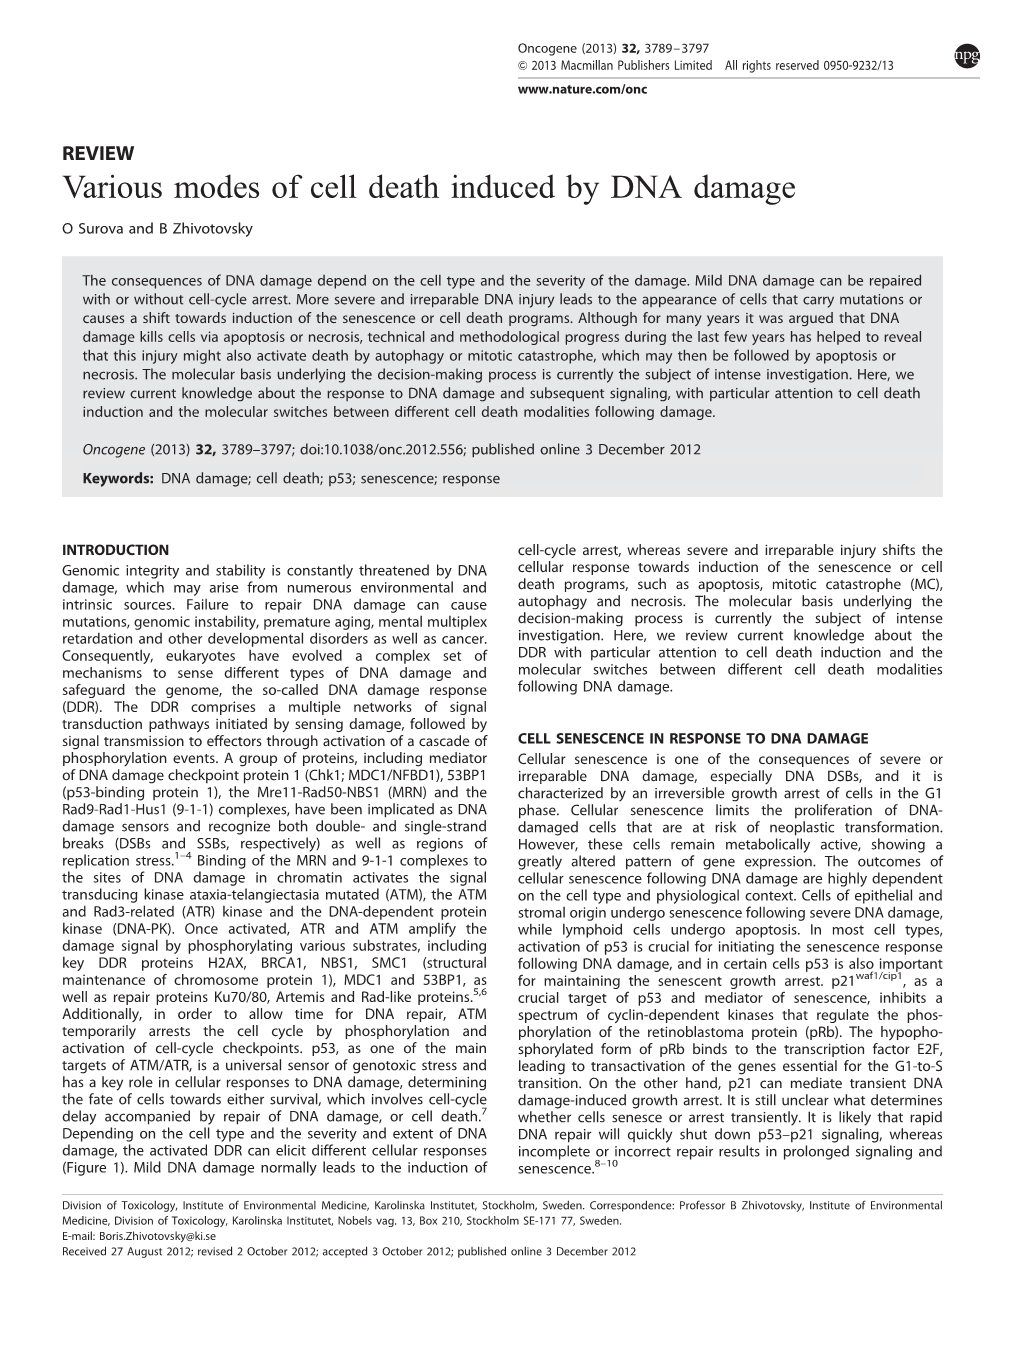 Various Modes of Cell Death Induced by DNA Damage